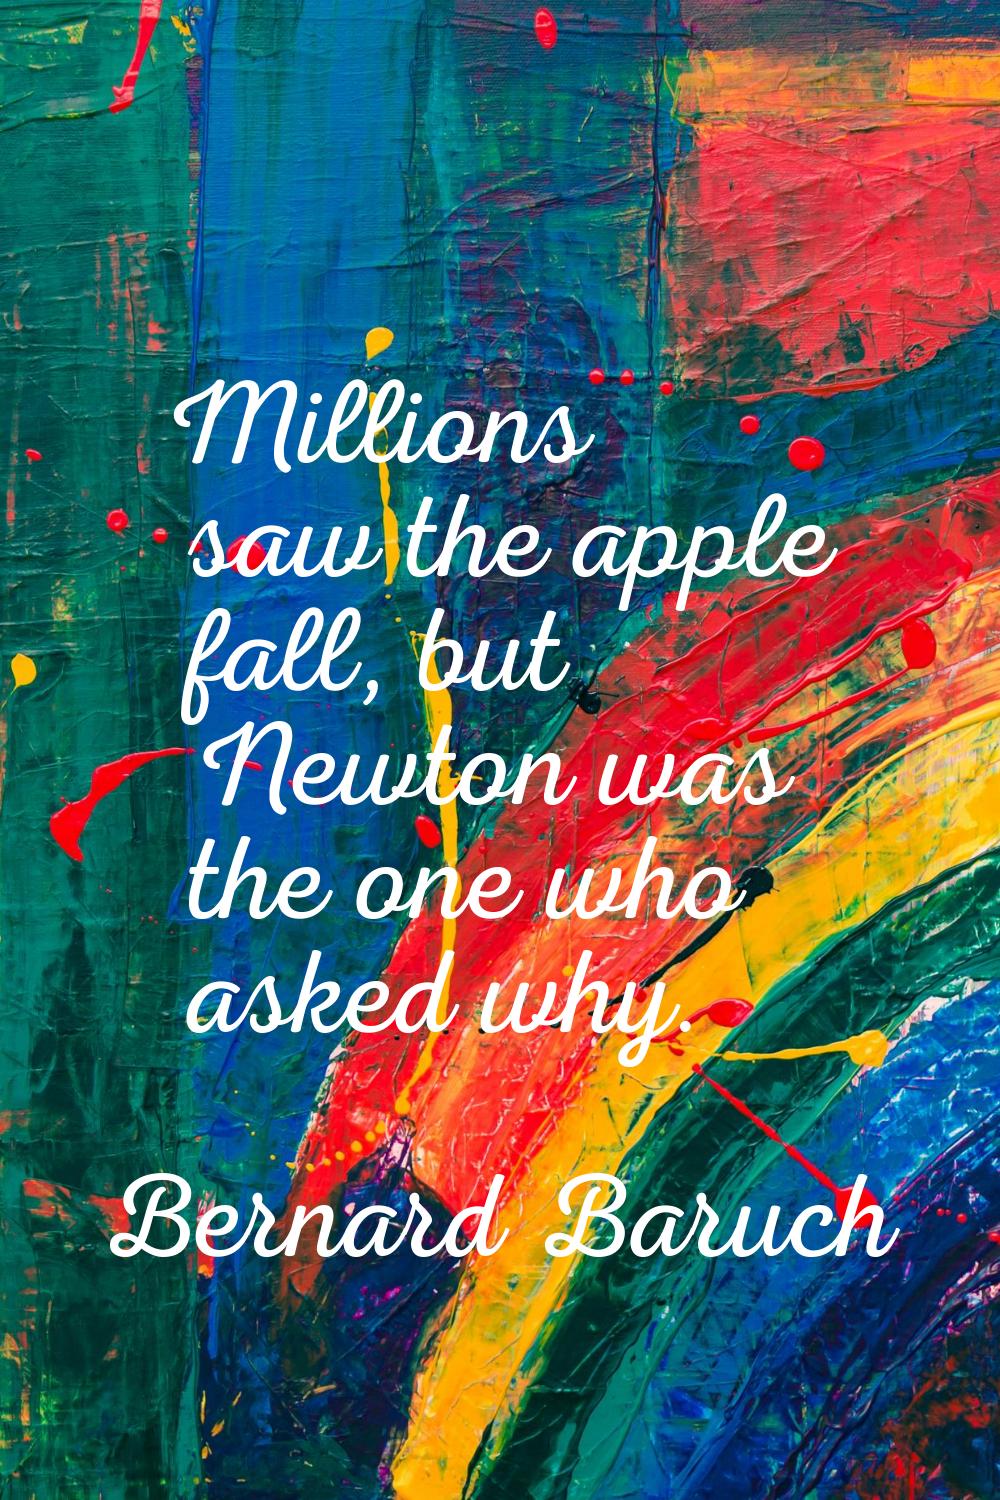 Millions saw the apple fall, but Newton was the one who asked why.